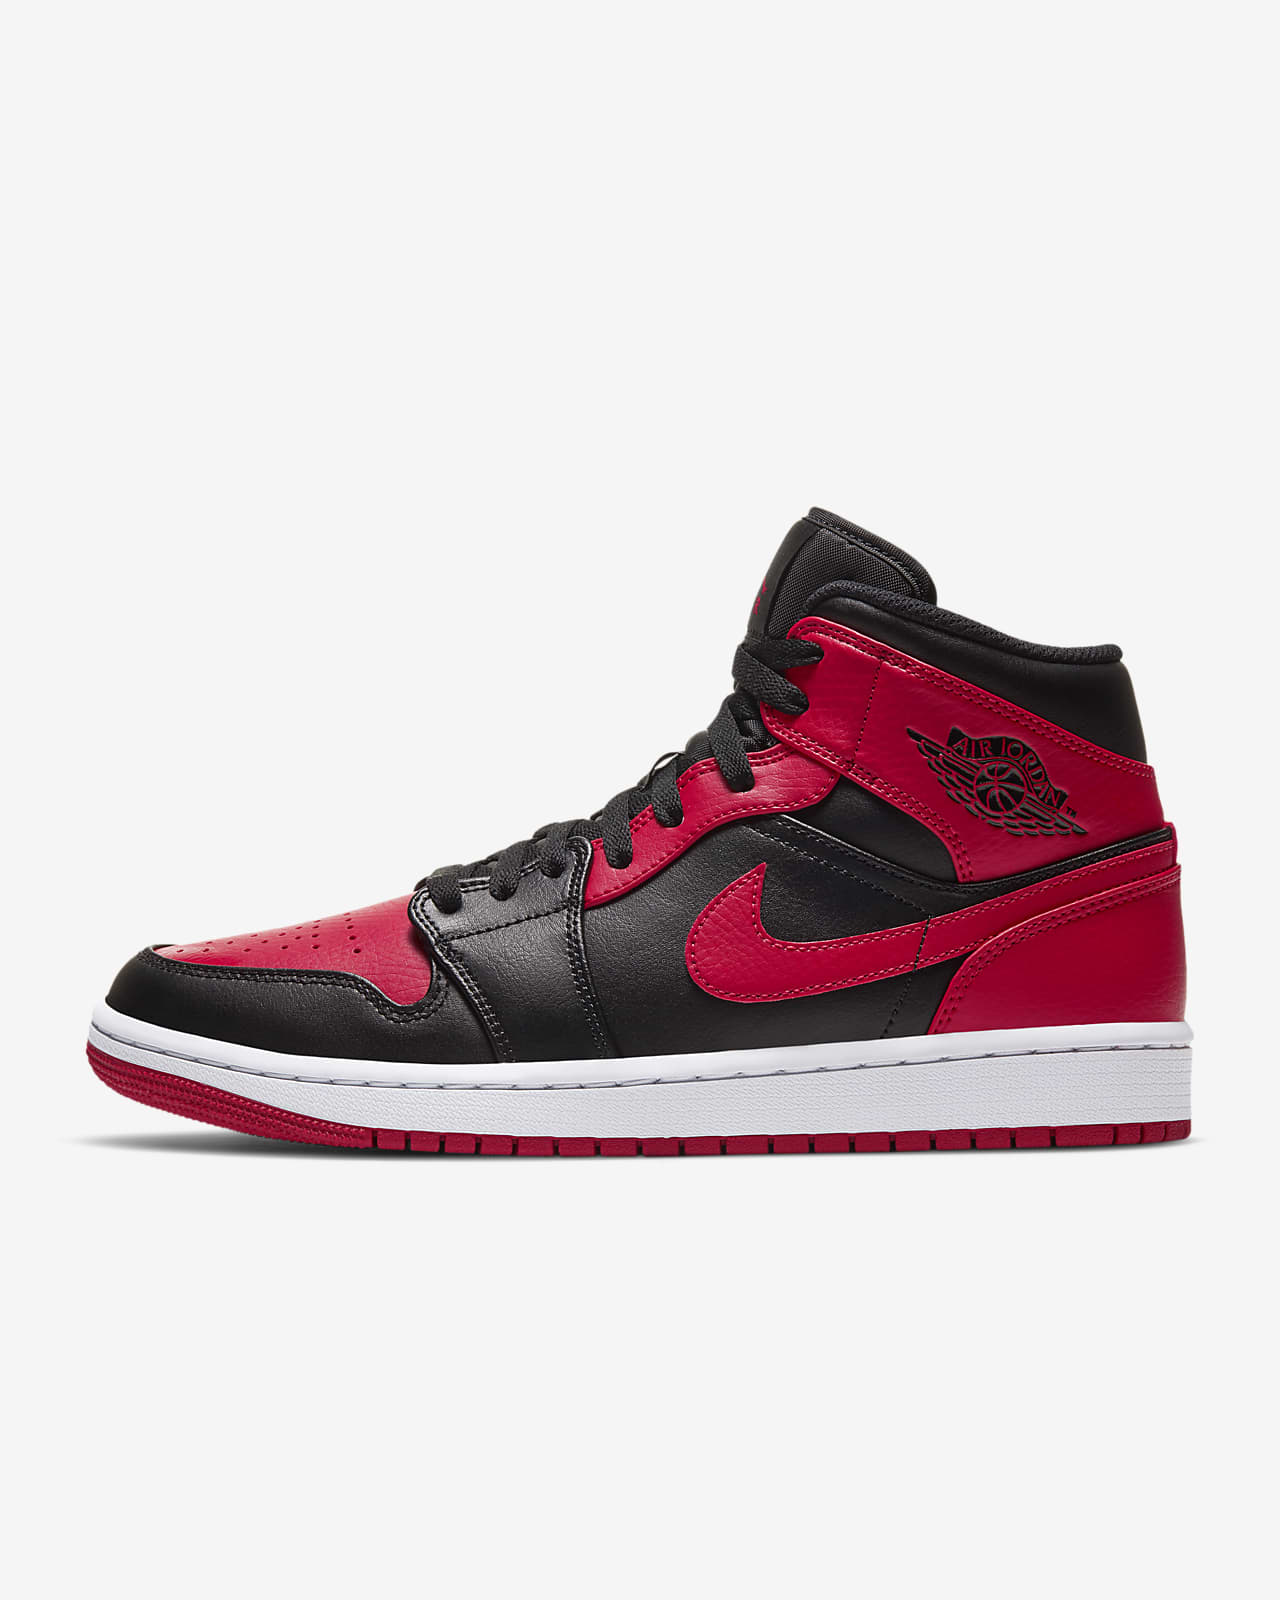 j1 mid red